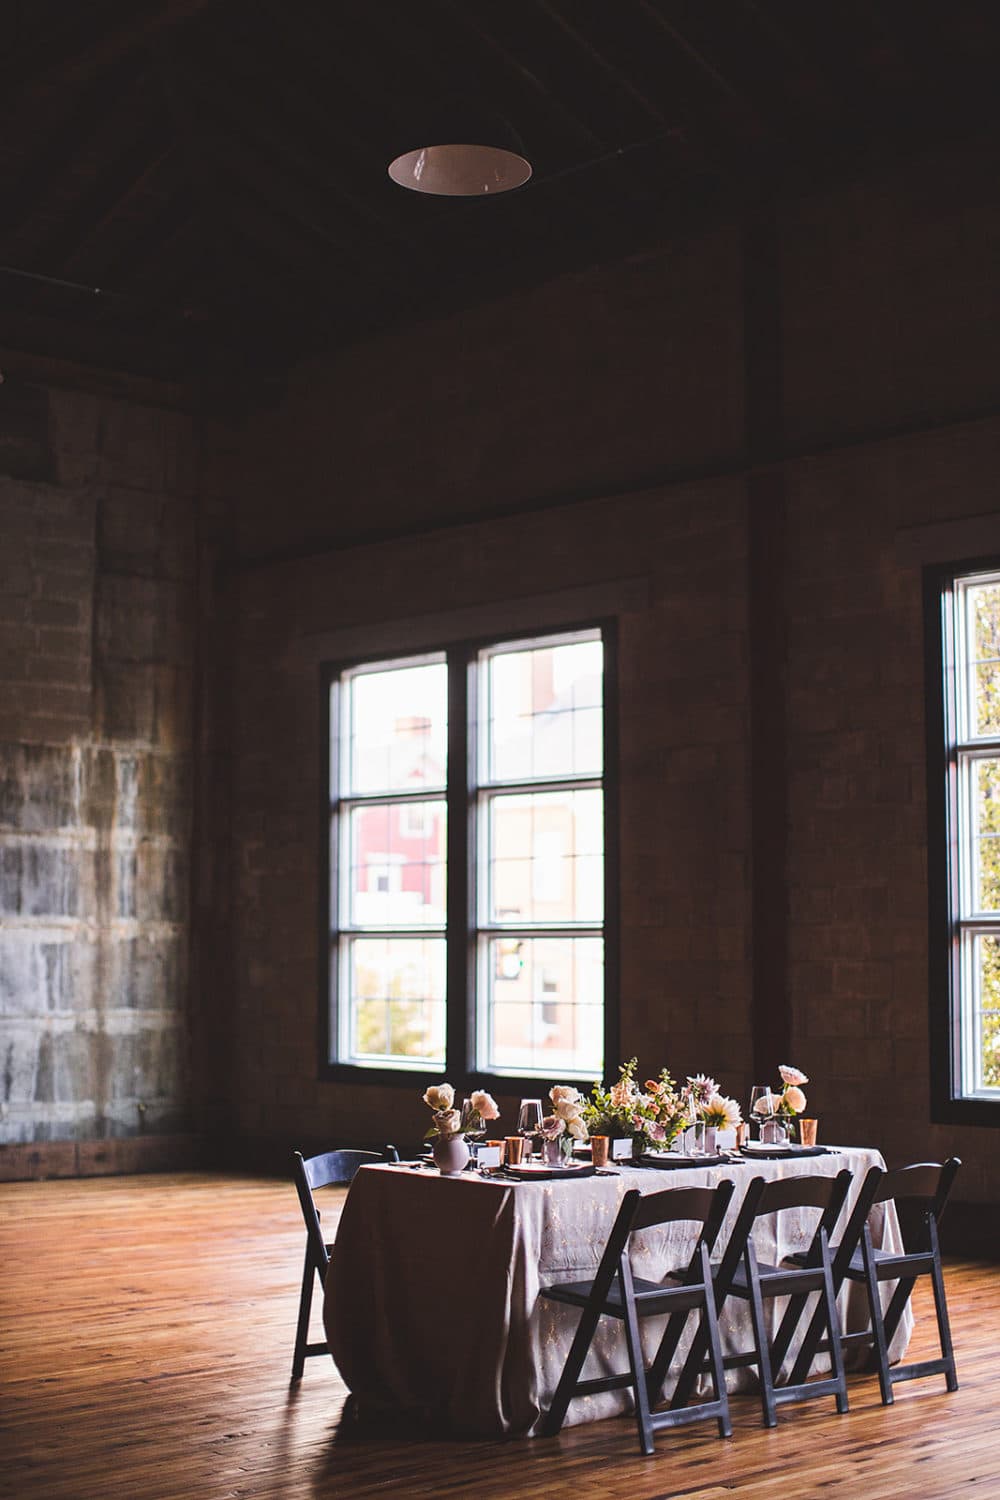 Olio is a 6,000-square-foot event space that now offers micro-wedding packages. (Courtesy Jessie Felix Photography)